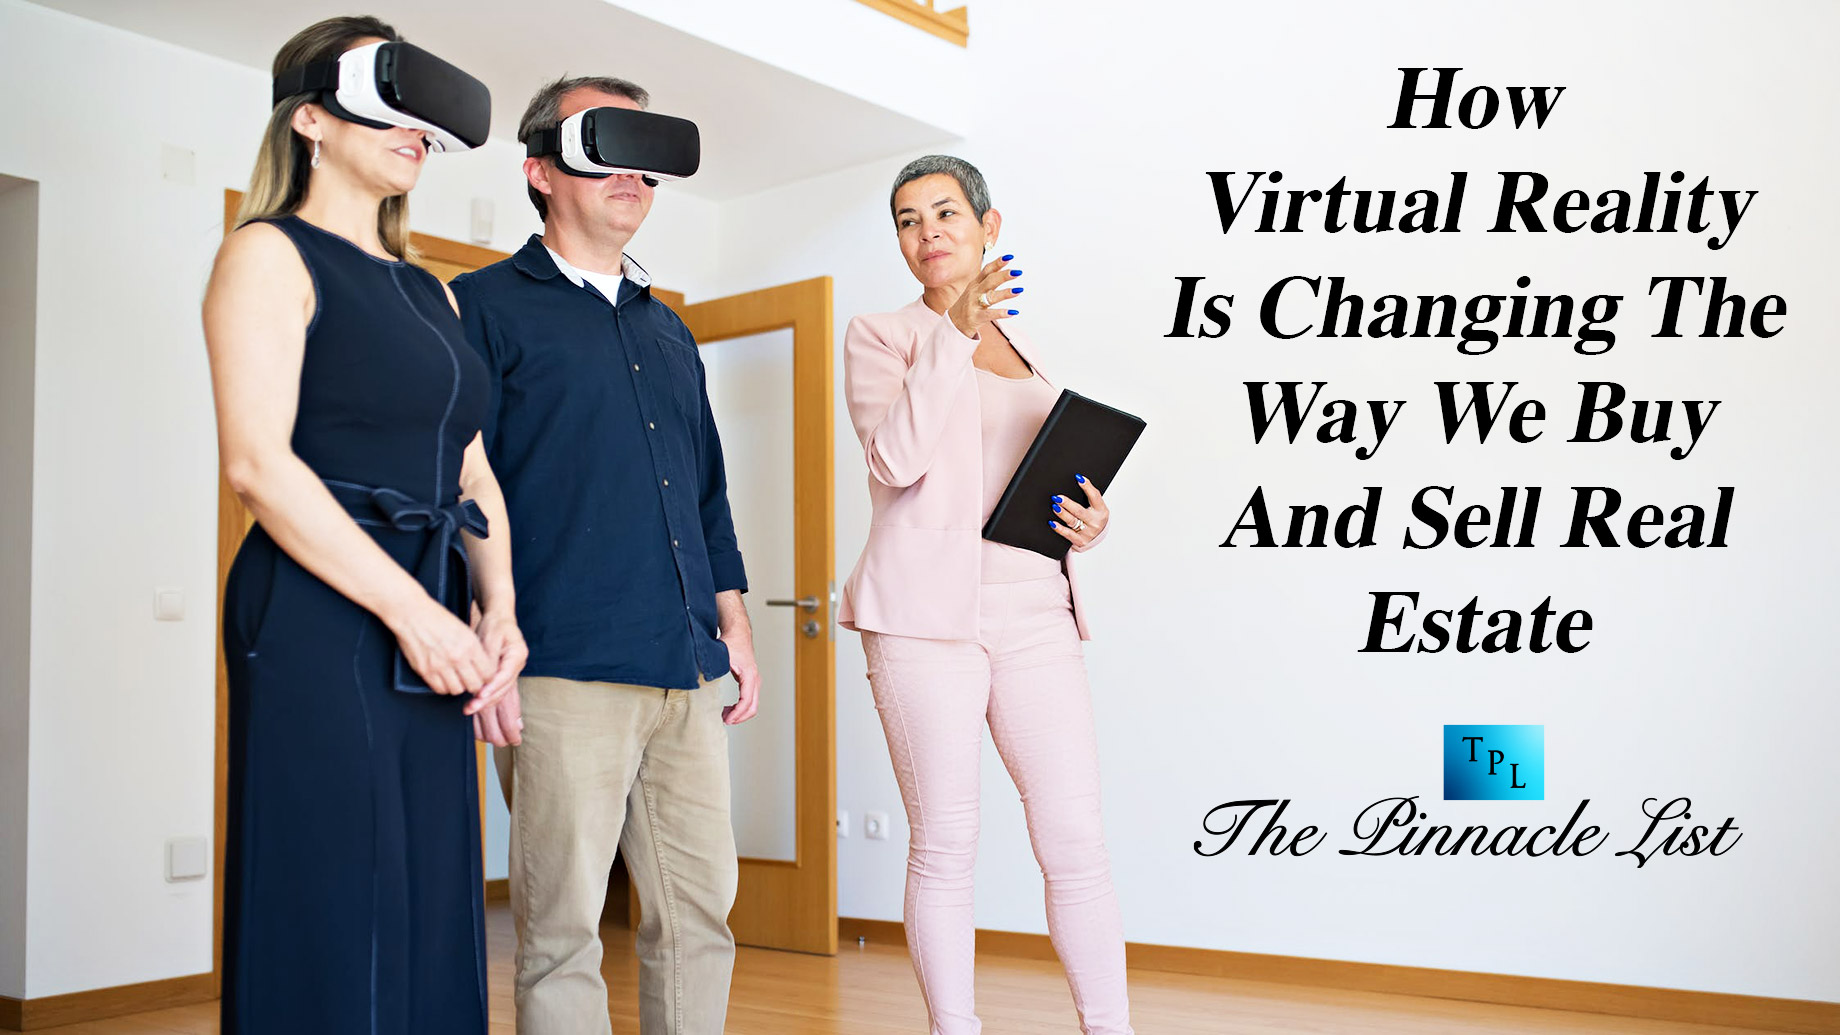 How Virtual Reality Is Changing The Way We Buy And Sell Real Estate